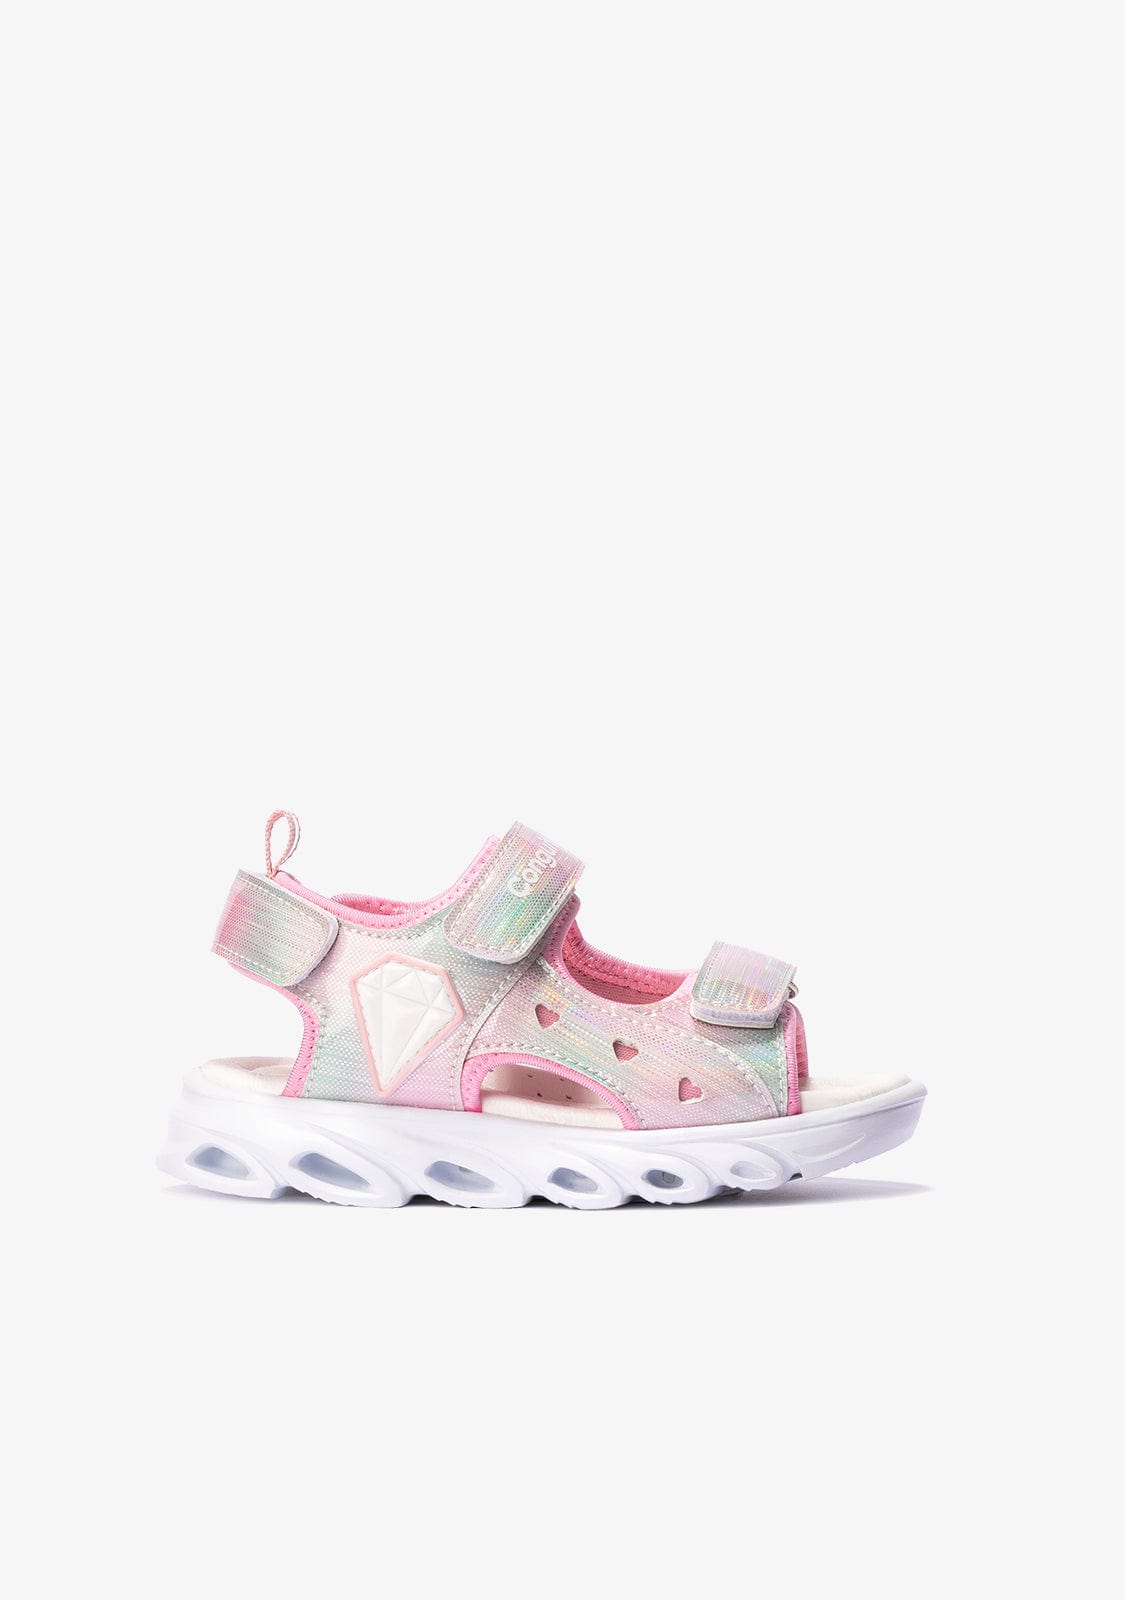 CONGUITOS Shoes Girl's Silver Pink With Lights Sport Sandals